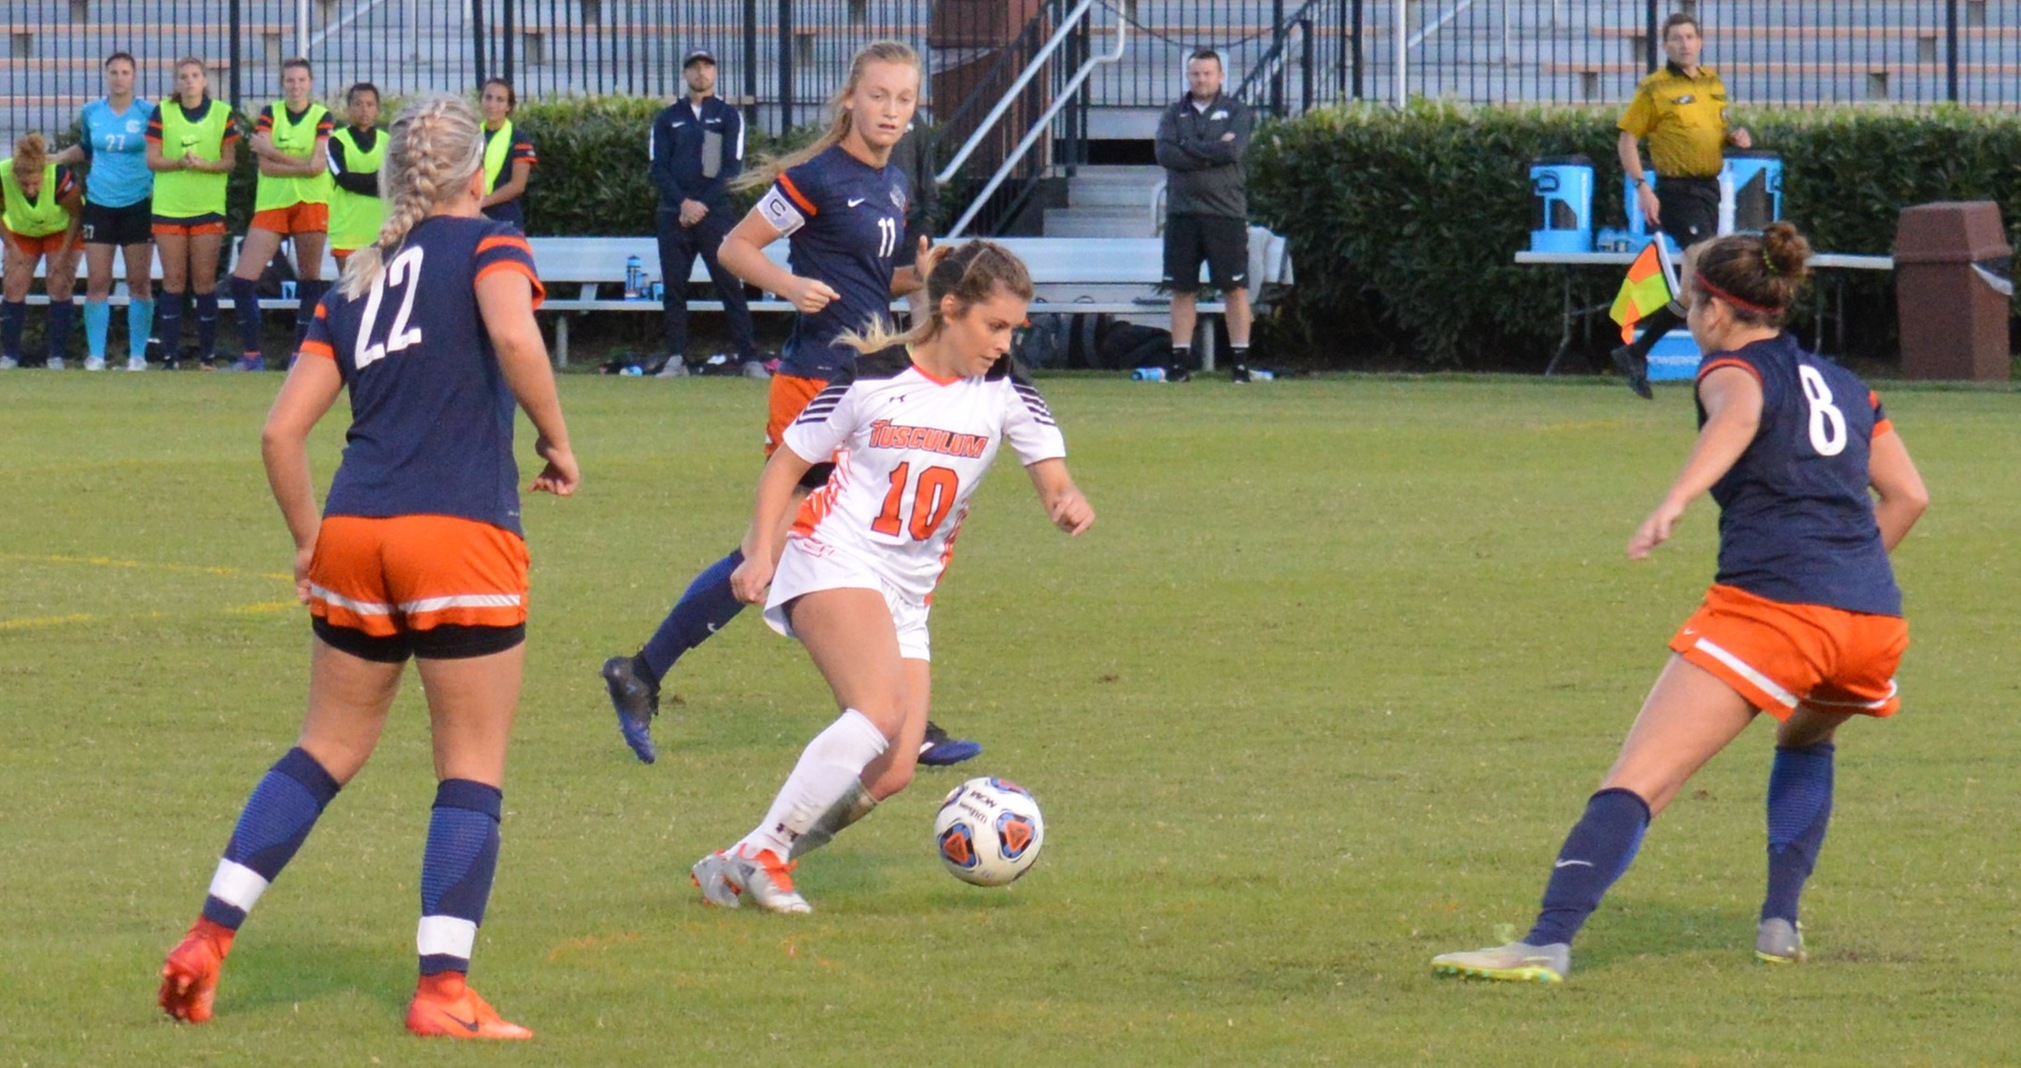 Hat trick boosts 5th-ranked Carson-Newman to 3-0 win over Tusculum